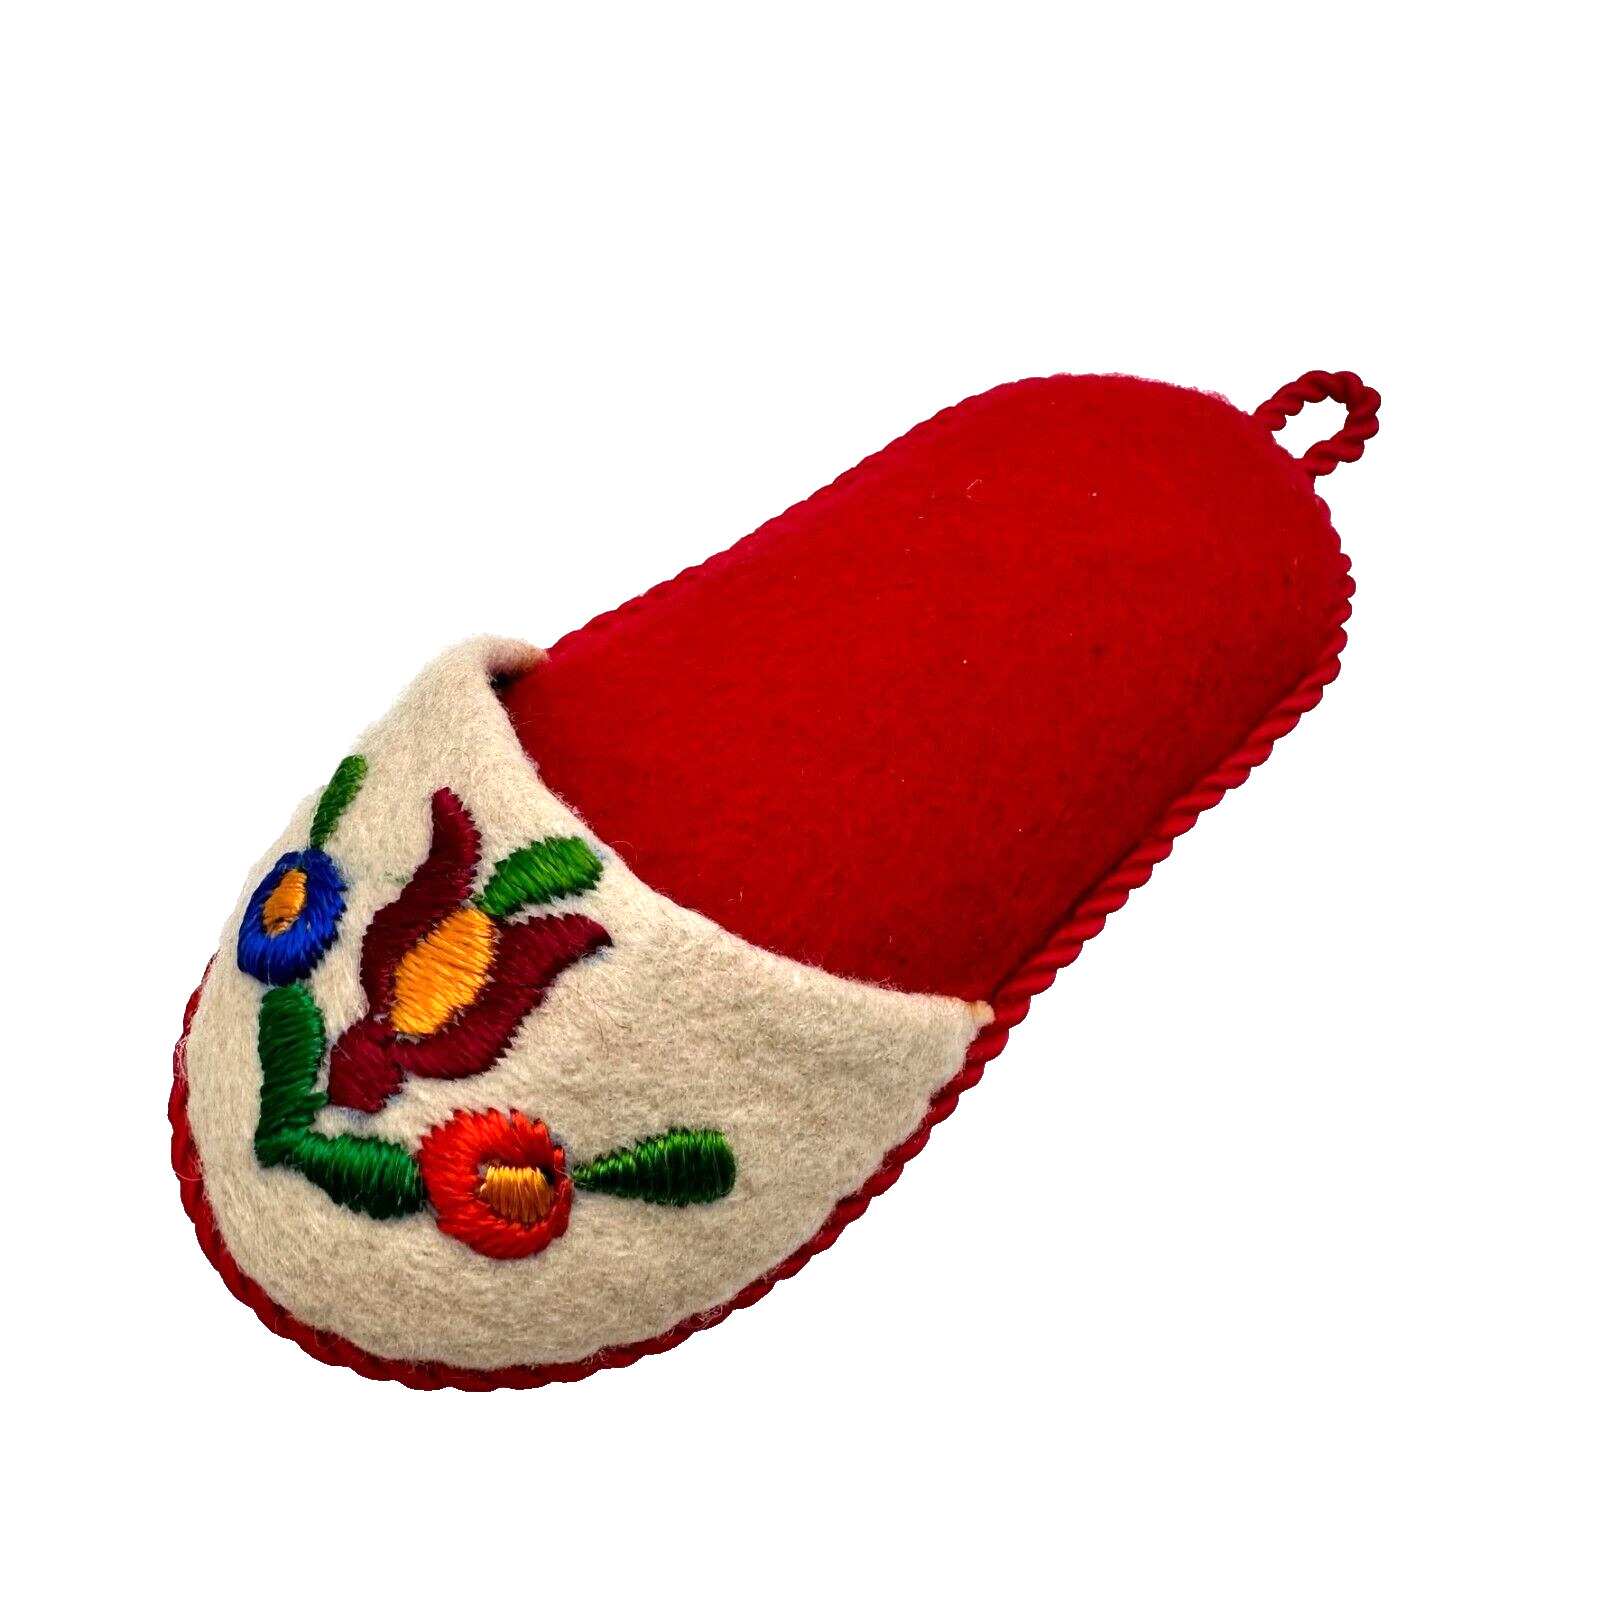 Vintage Hungarian Embroidered Felt Shoe Wall Hanging Ornament 5.25 Inches